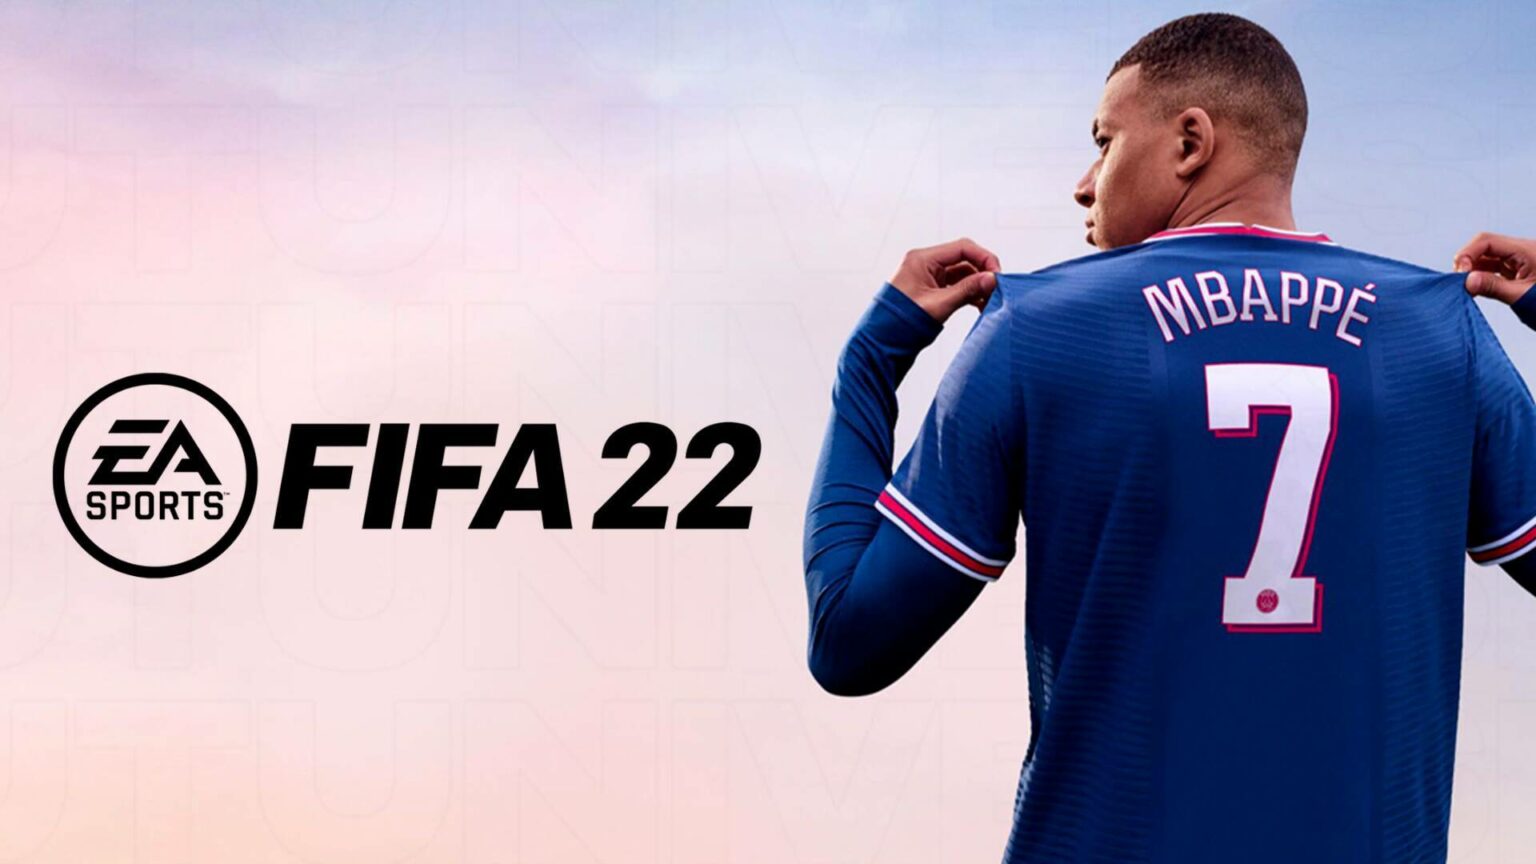 fifa22 apk android